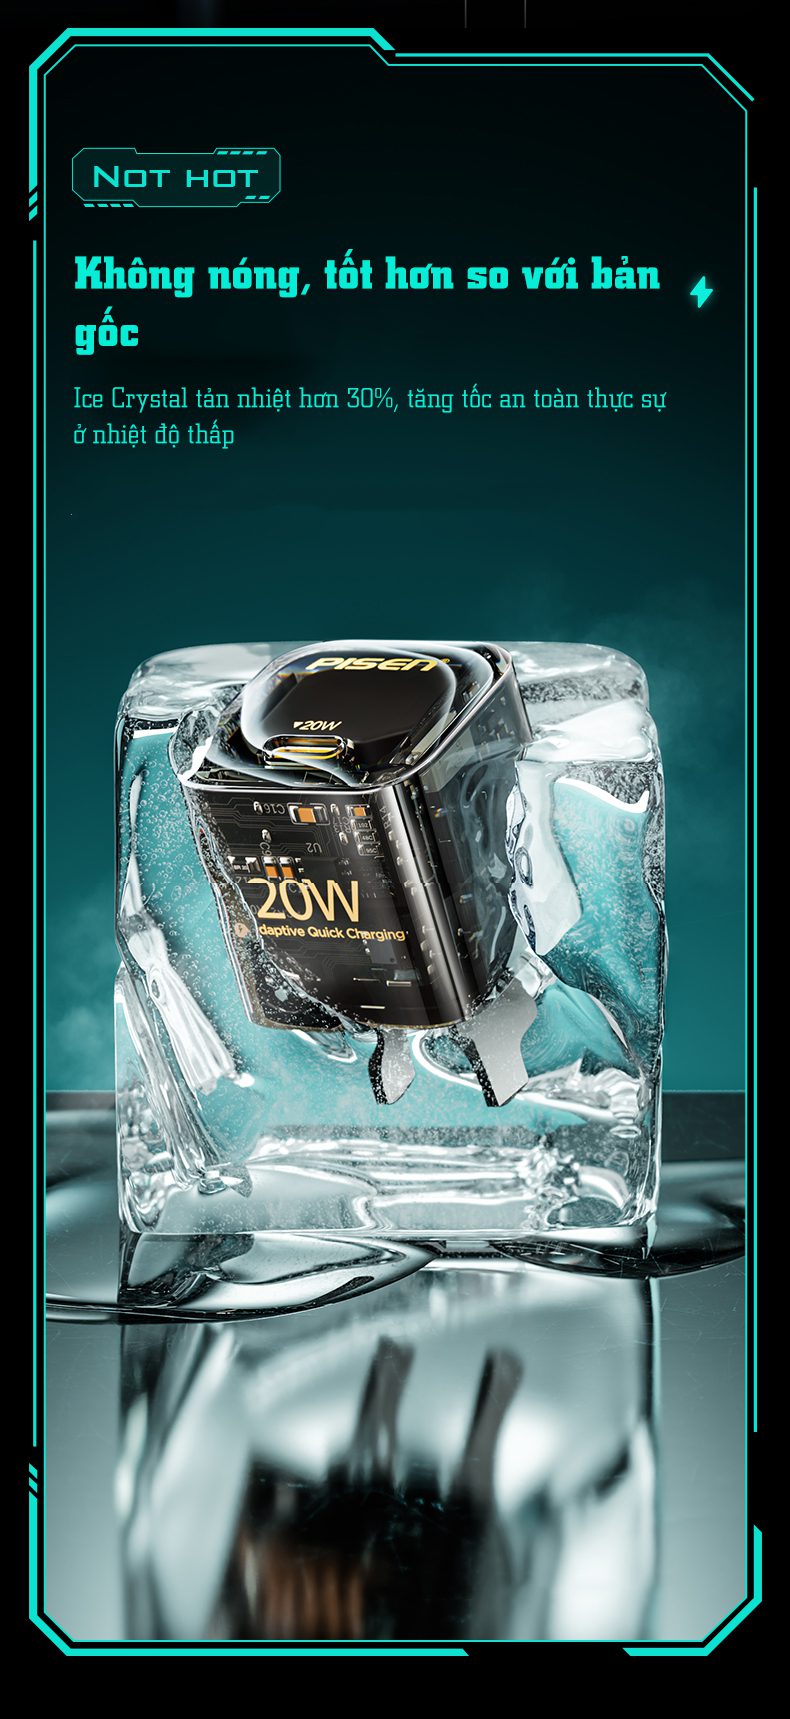 Quick ice Crystal PD 20W Explorer 9